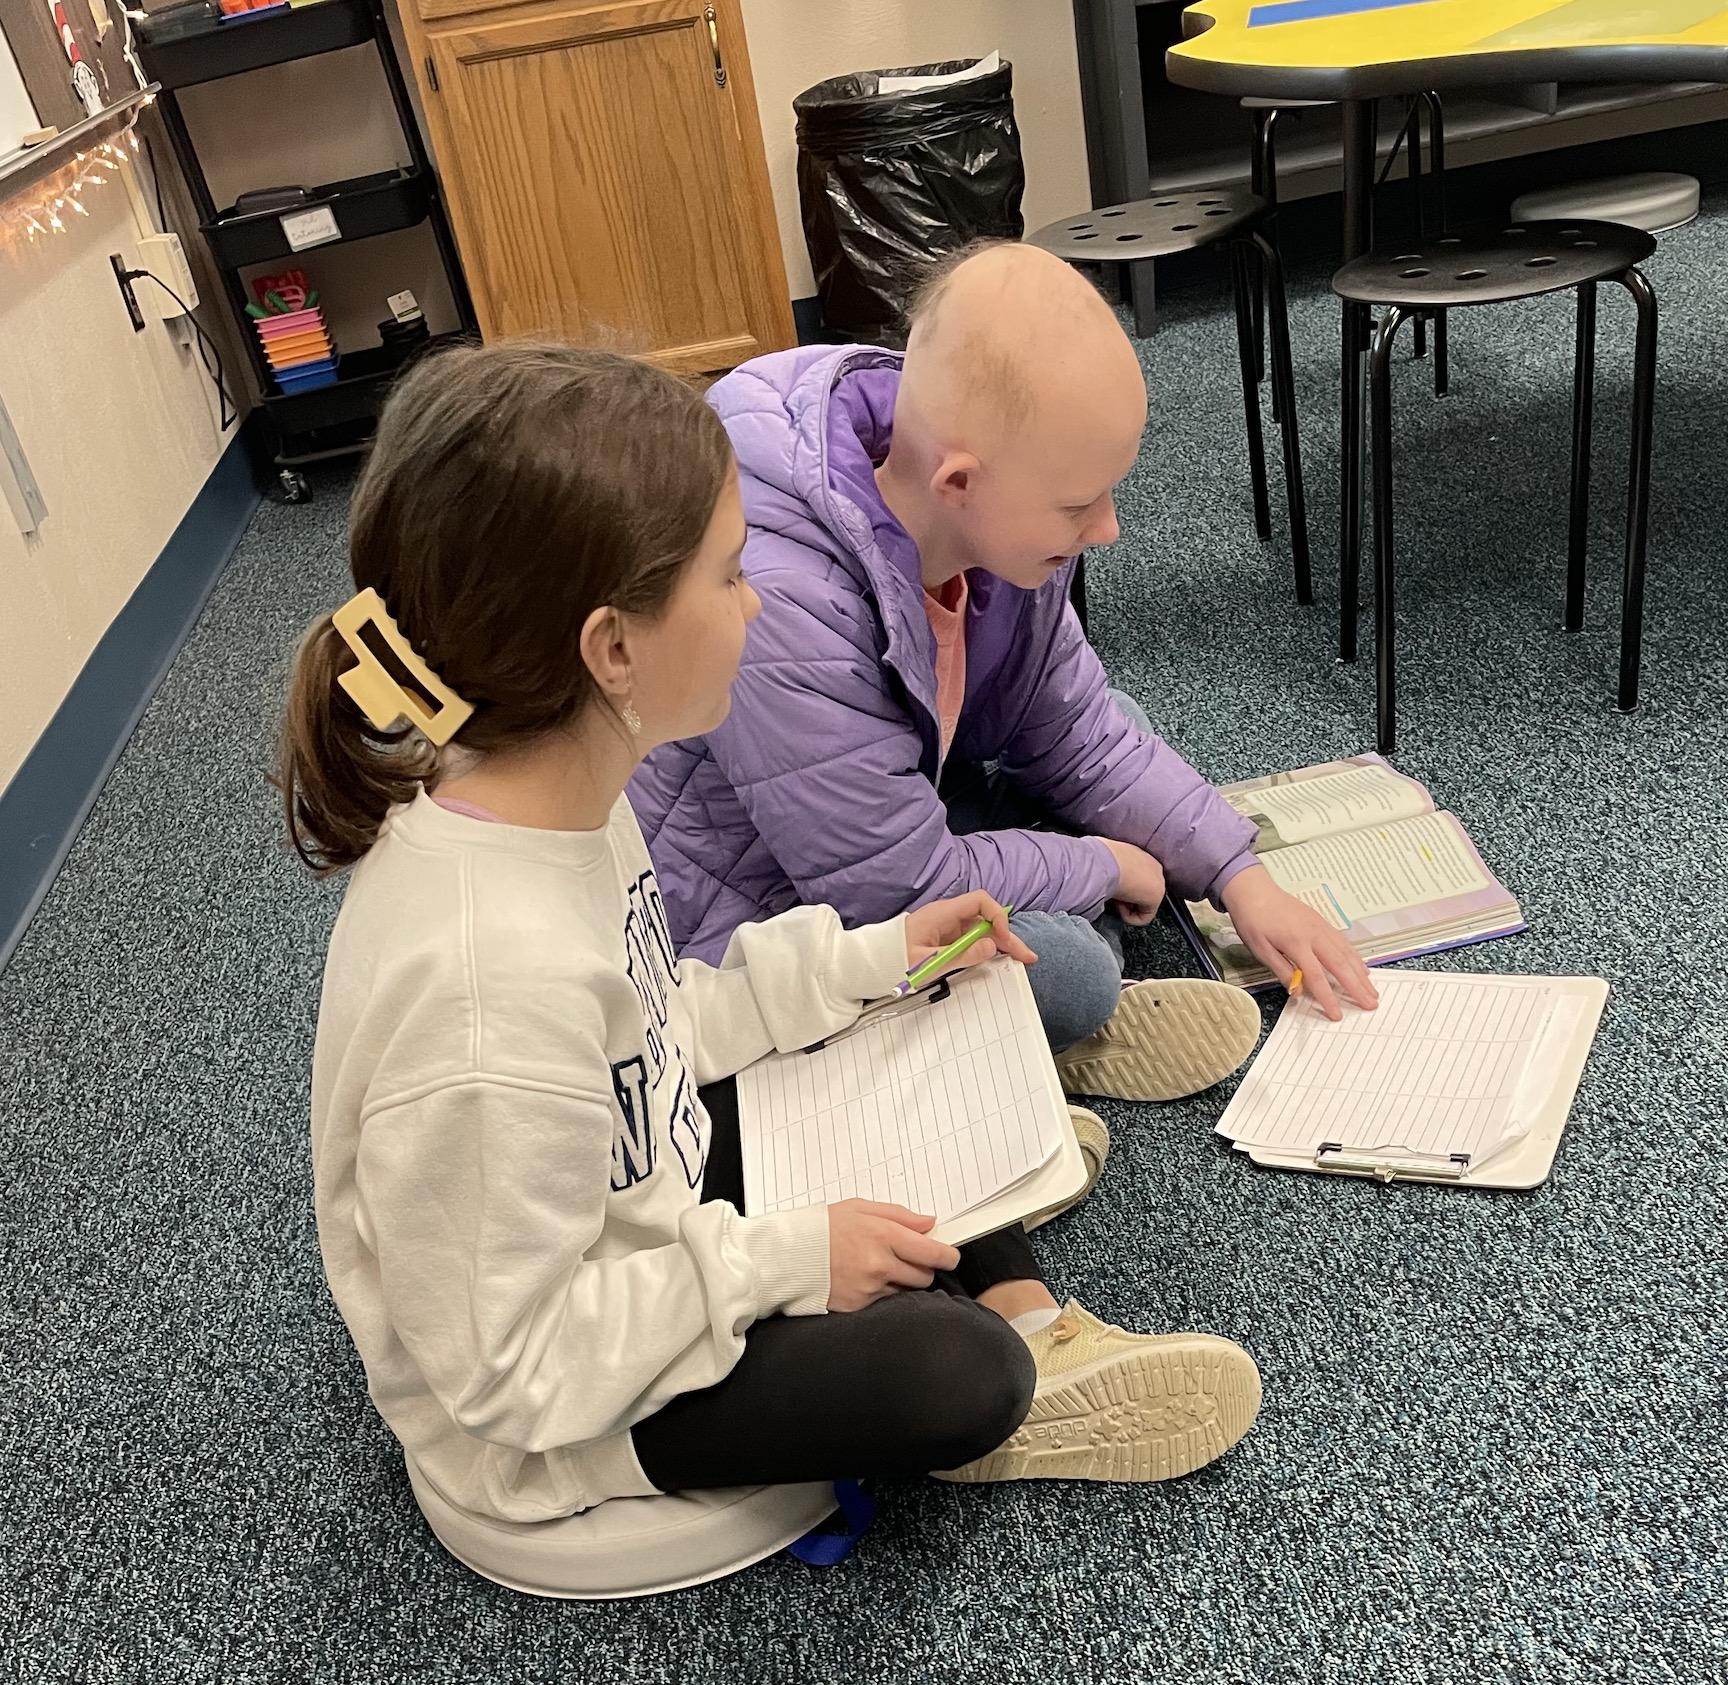 Fifth-graders Evalyn Borst and Emma Gligonic use the new floor cushions to complete an assignment